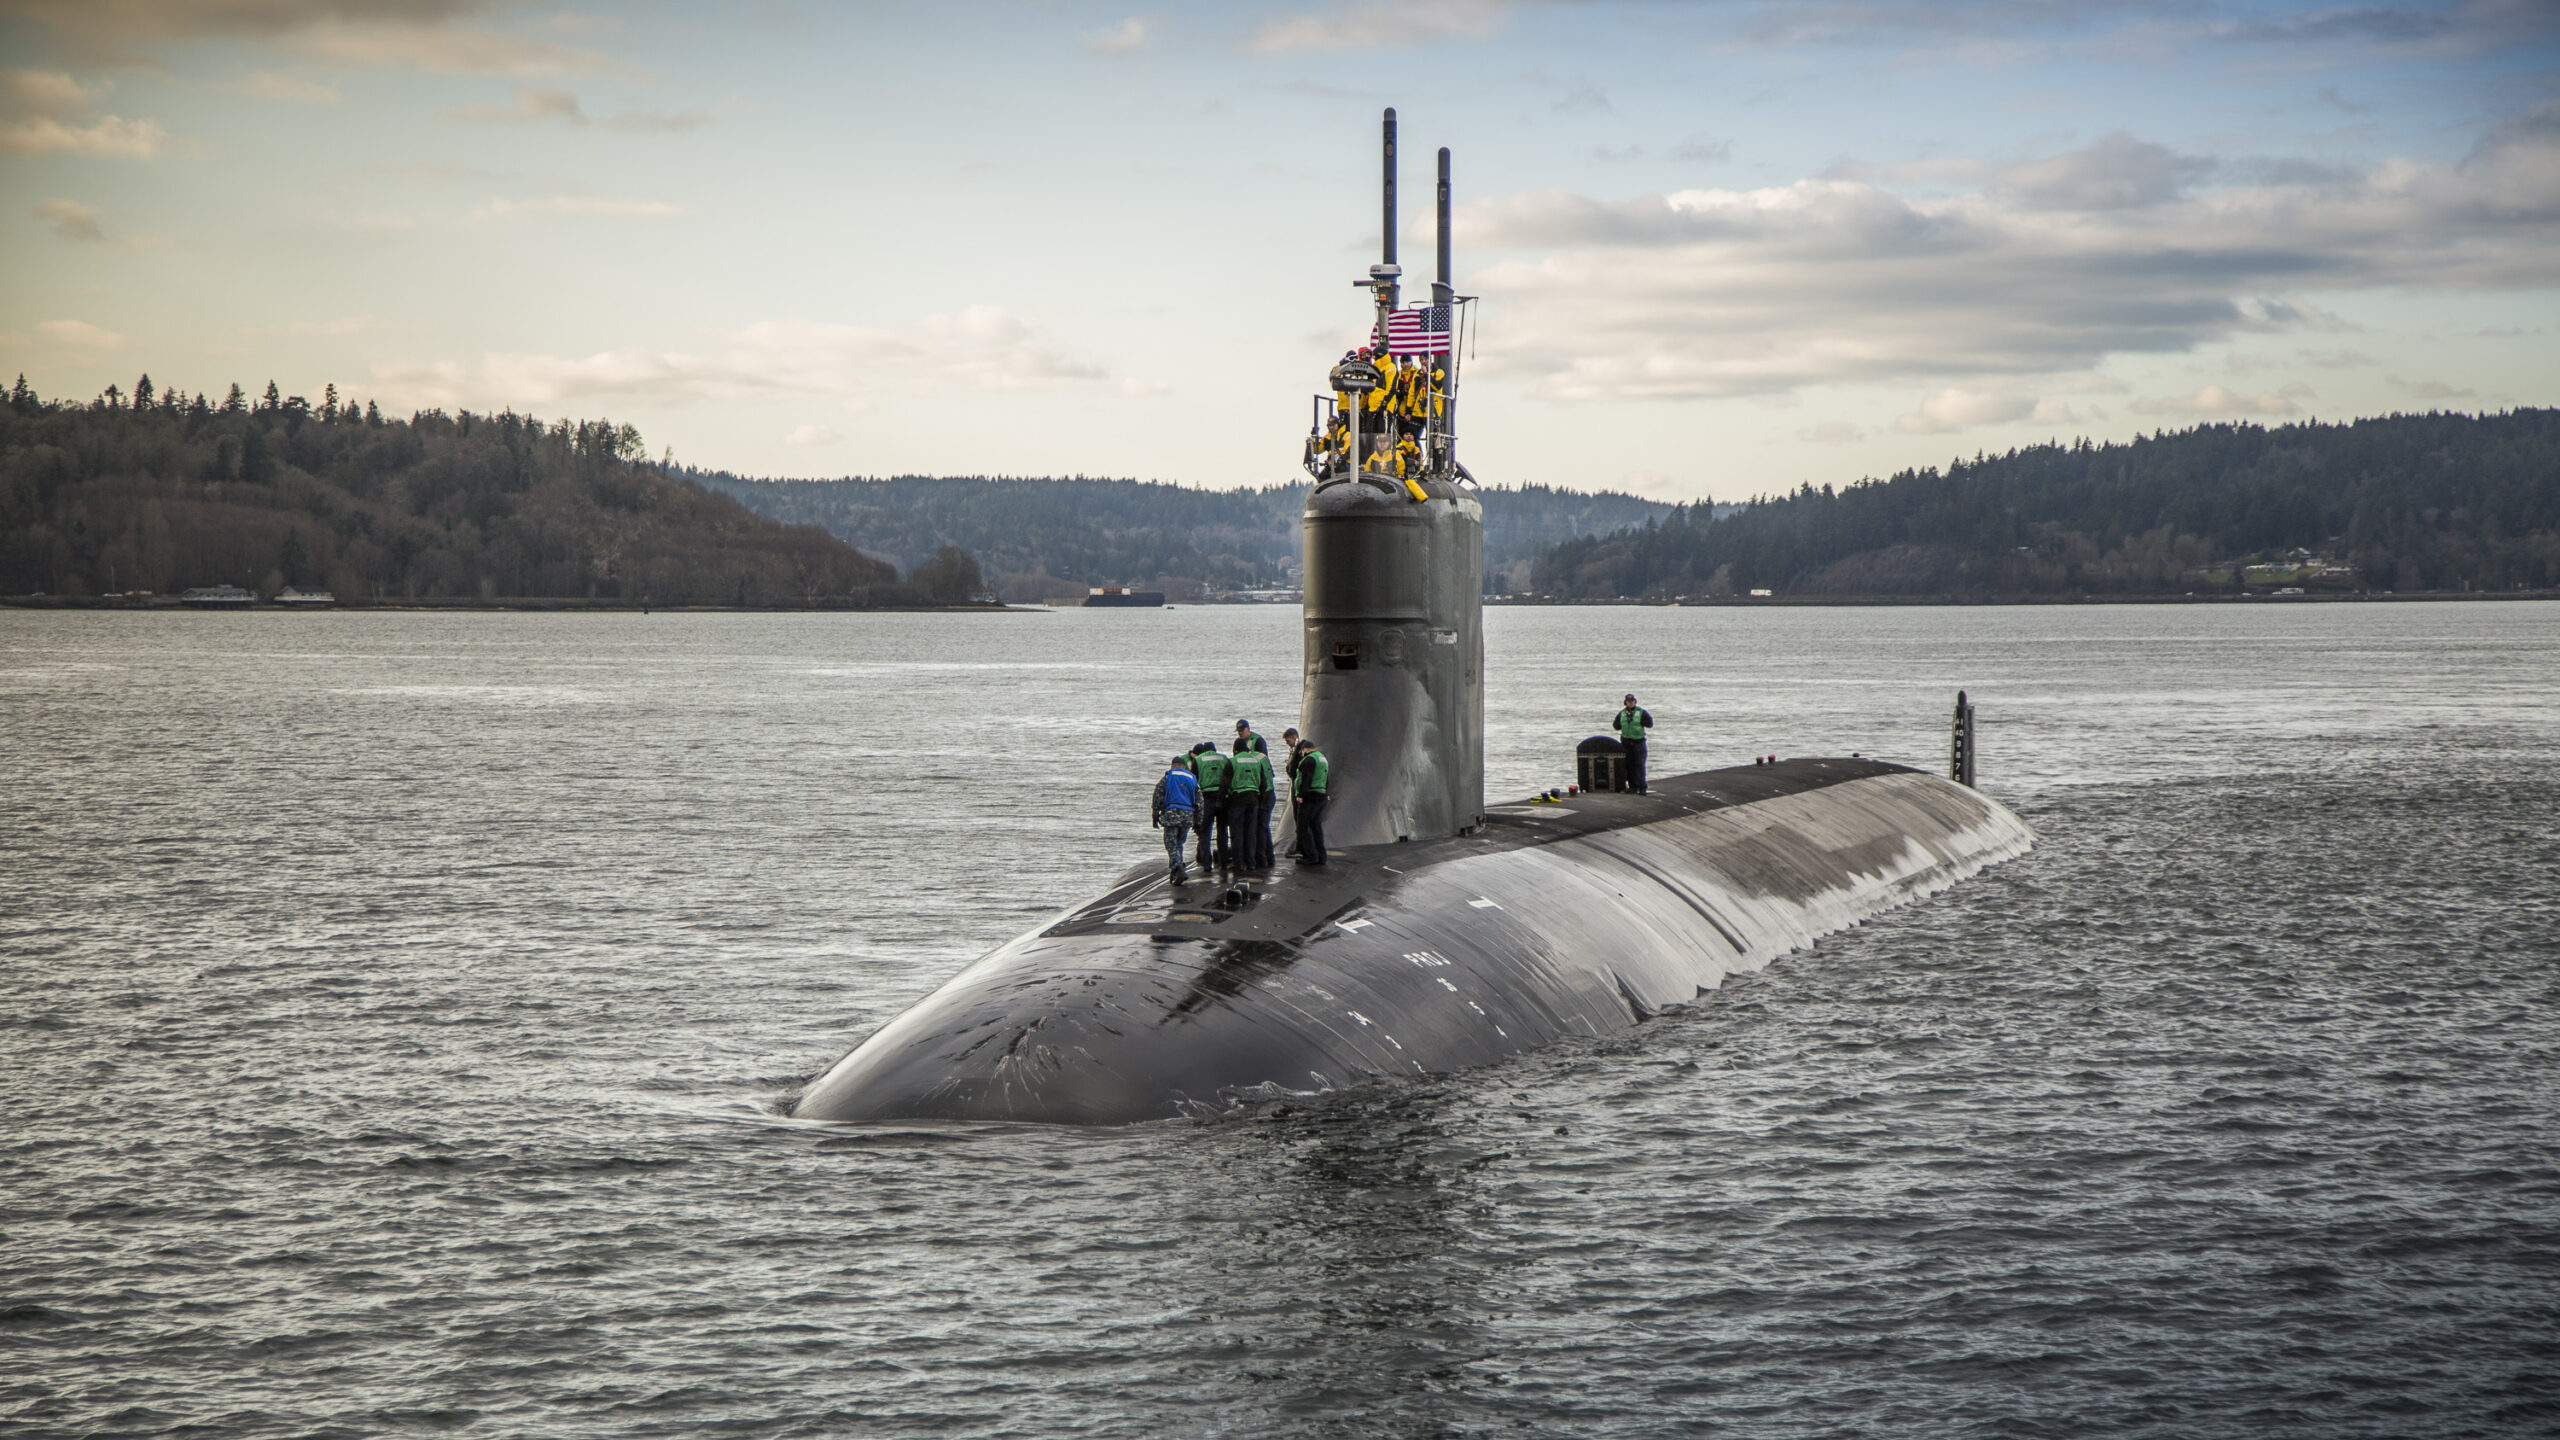 Navy finds multiple failures in ‘preventable’ sub accident in Indo-Pacific